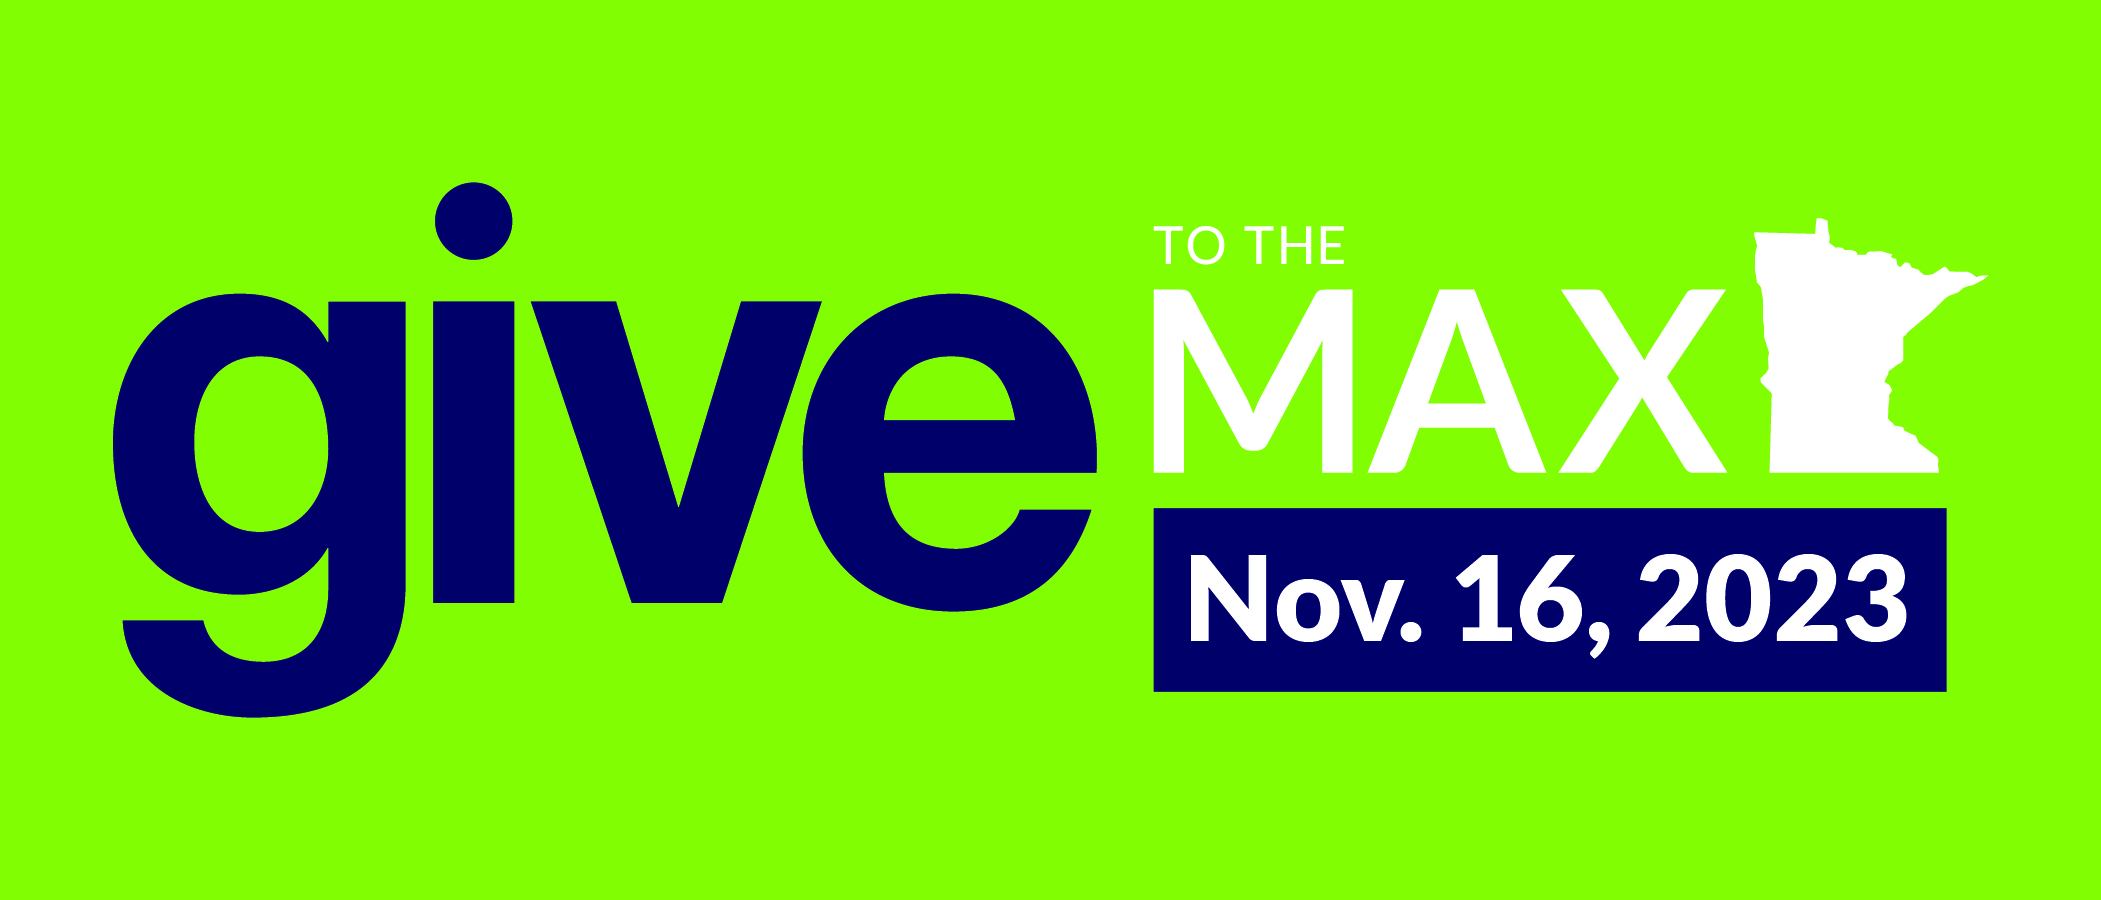 Give to the Max Day logo on a green background. On the left, "Give" in large blue letters. To the right, "To the max" and an outline of the state of Minnesota. Below, a blue box with white text that reads "Nov. 16, 2023."